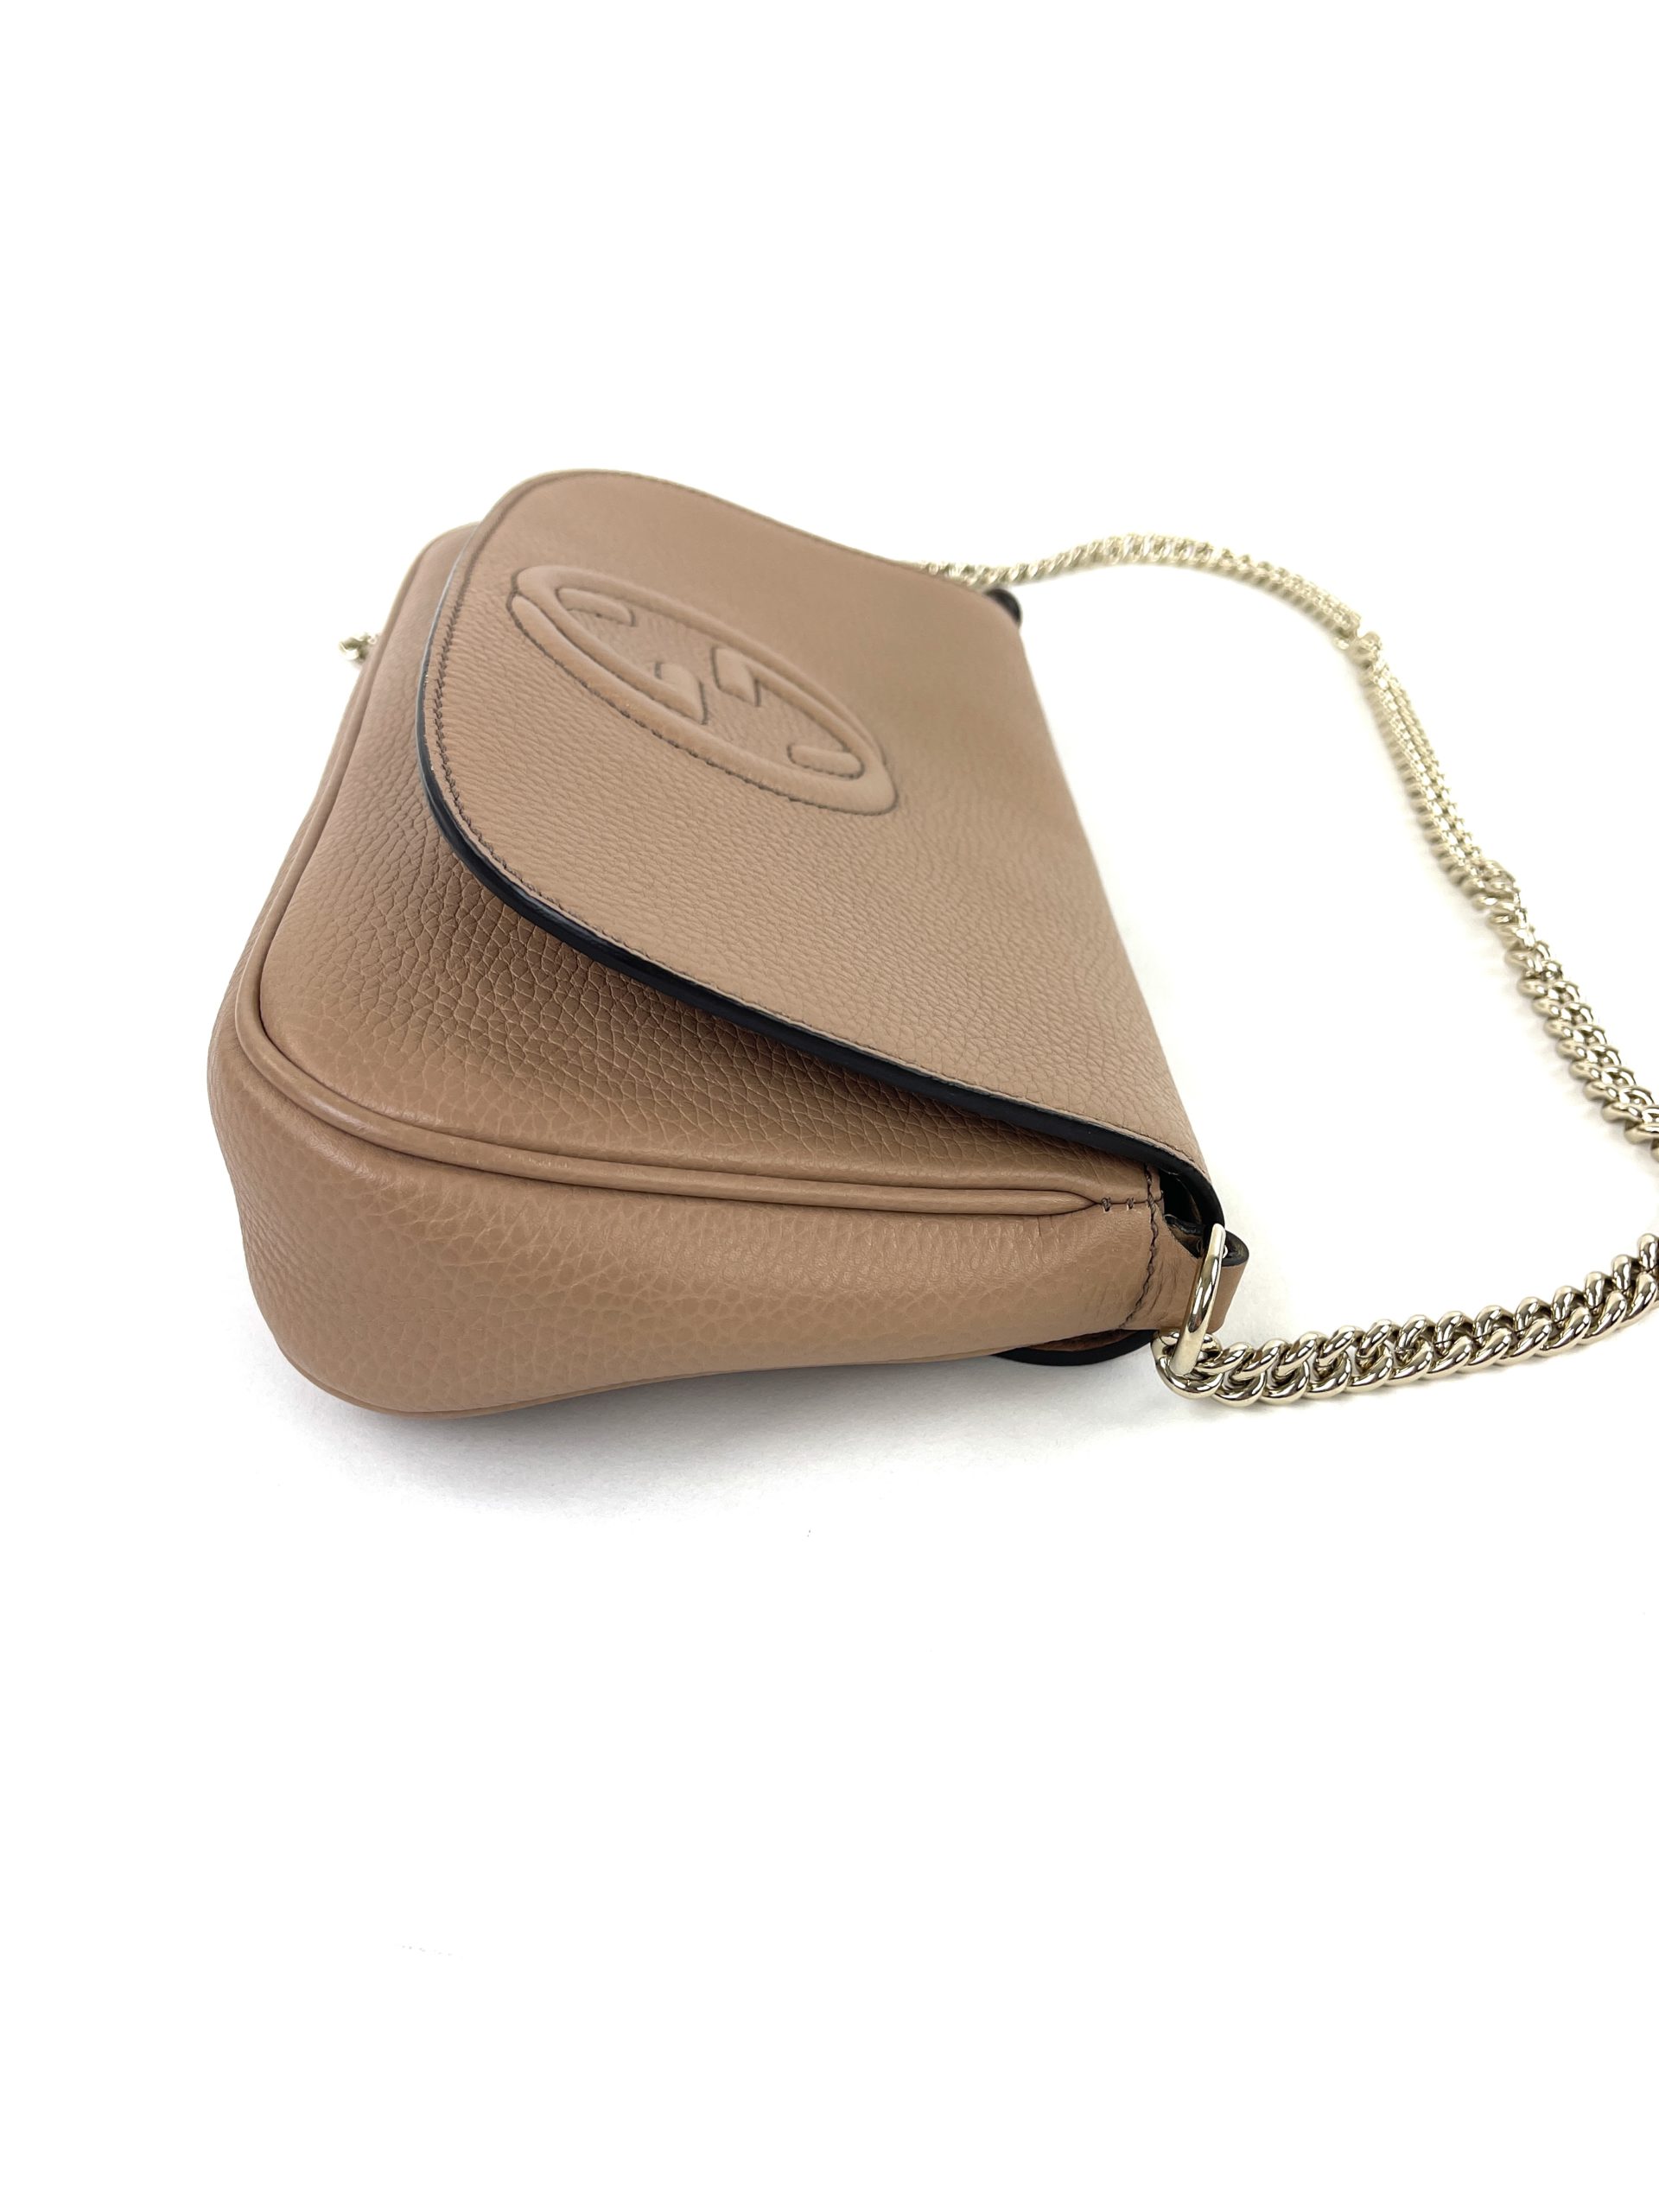 Gucci Soho Leather Wallet On Chain Crossbody Bag Brown